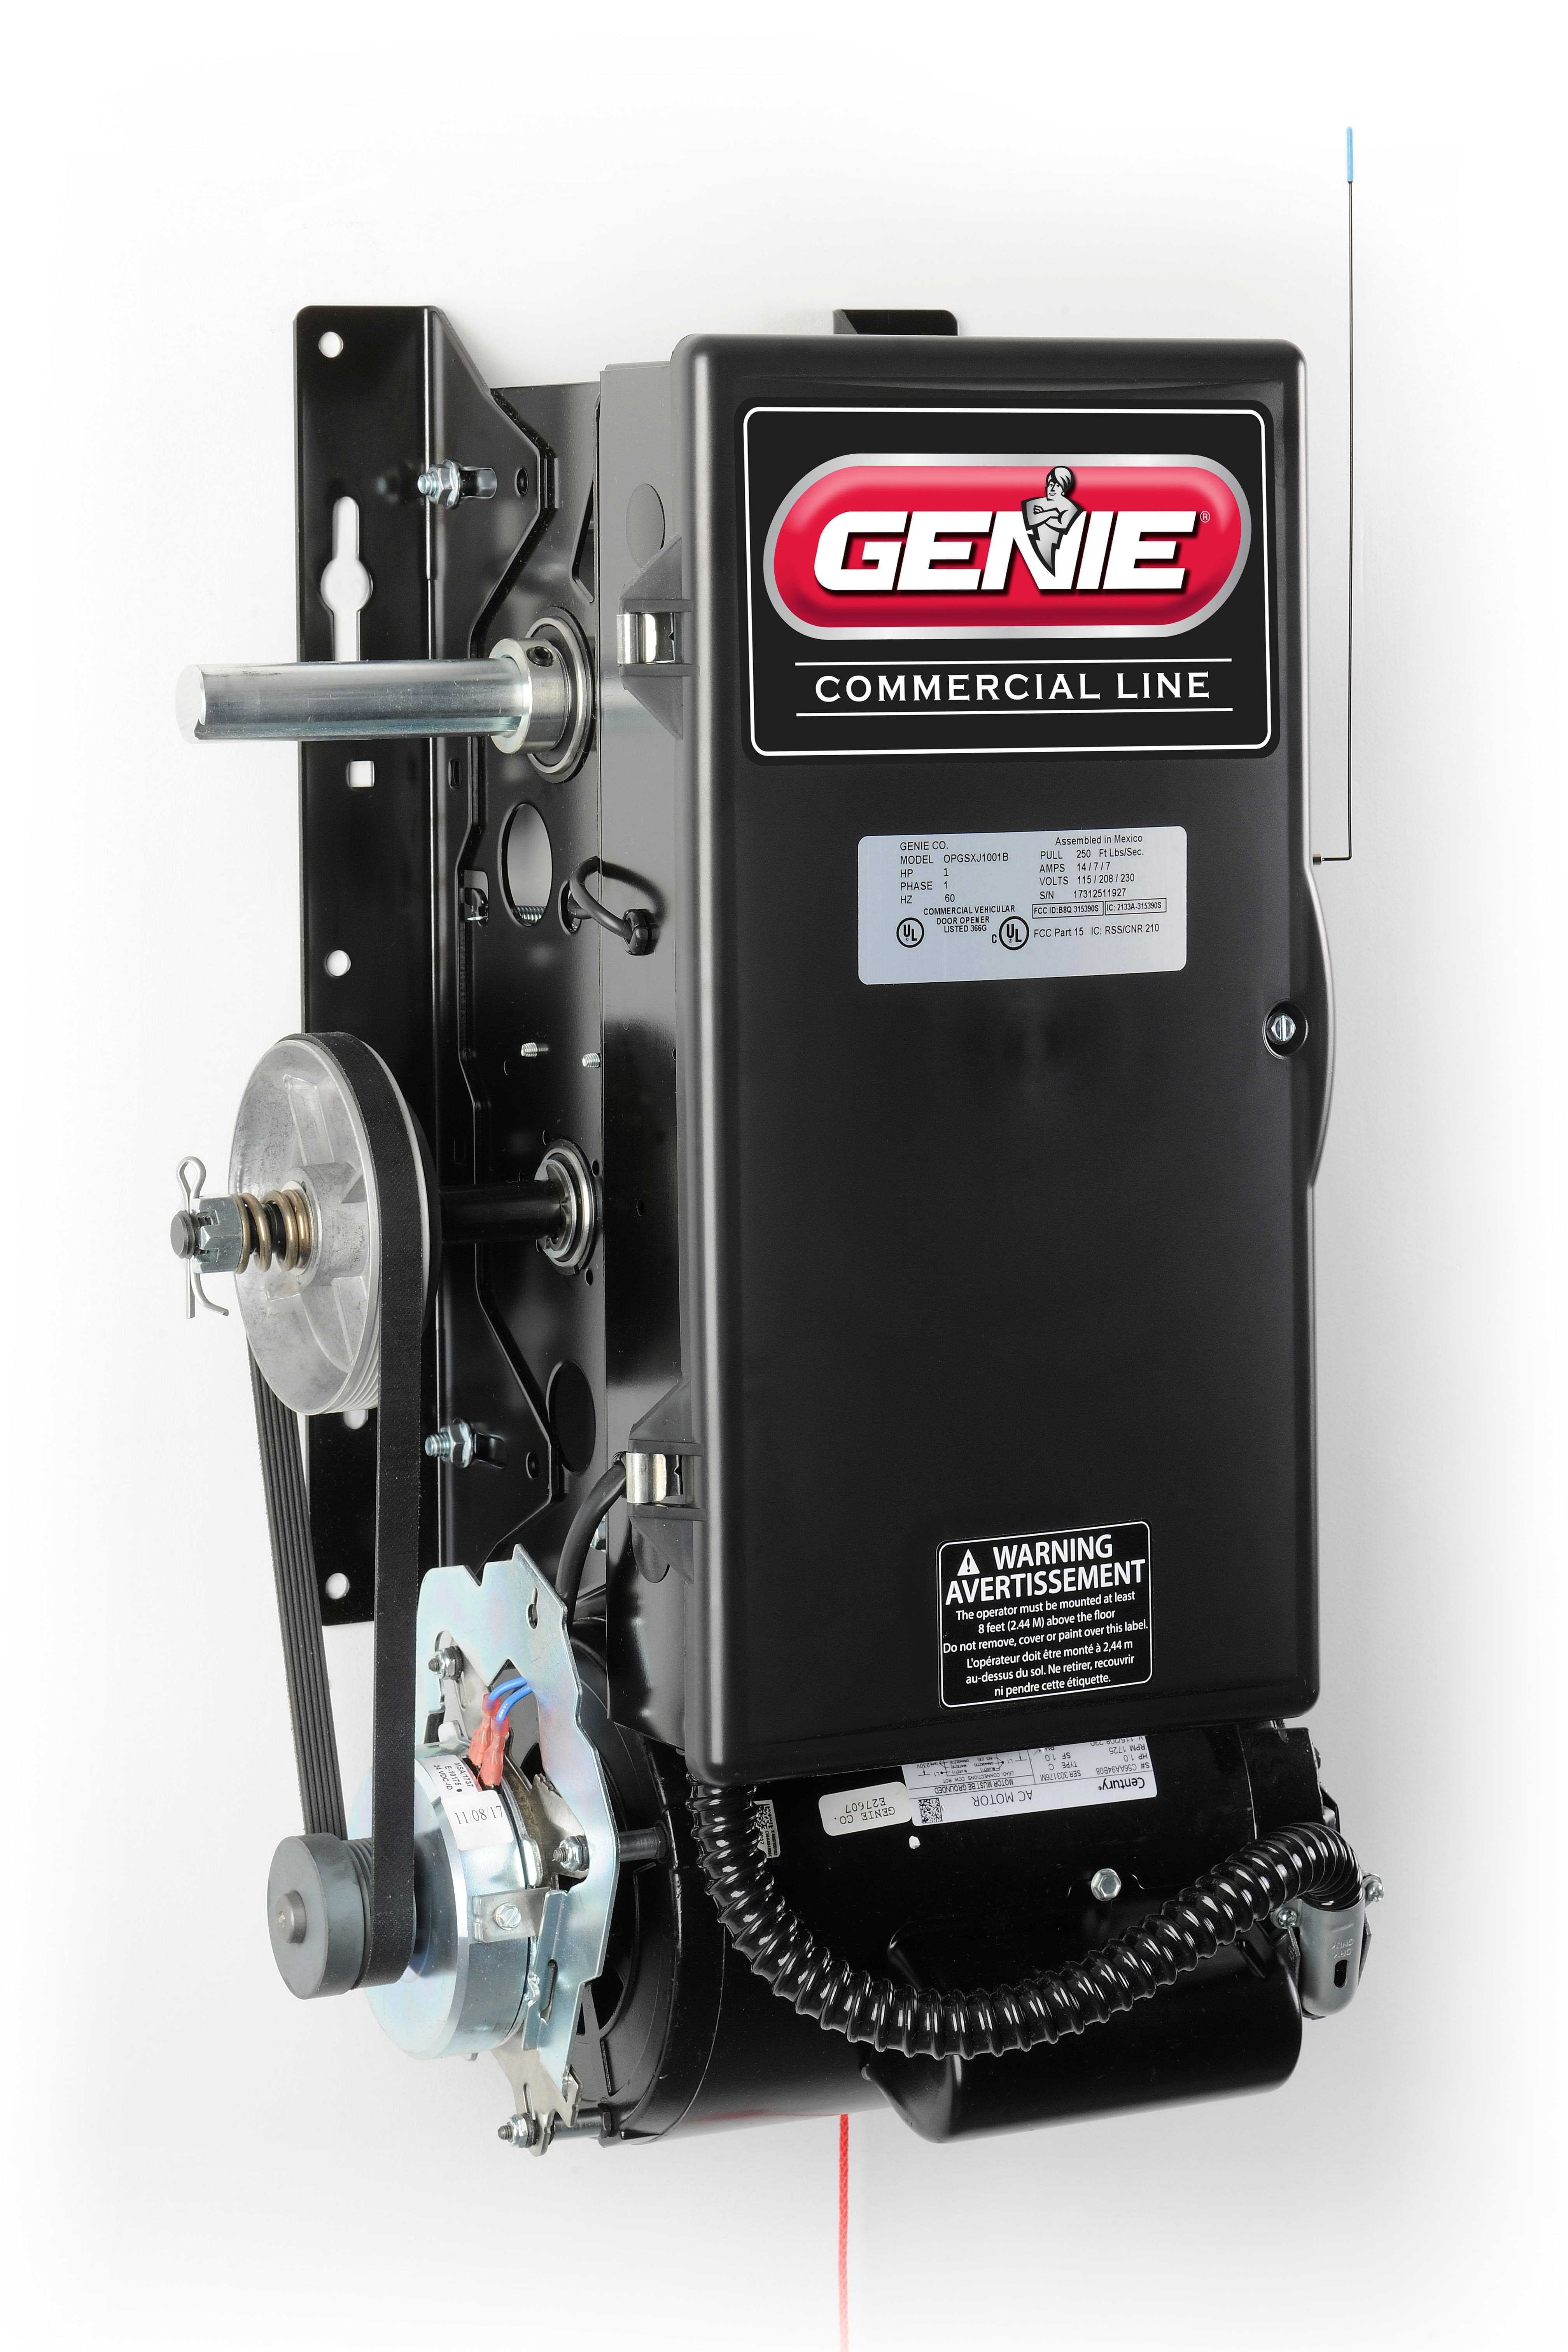 Genie commercial line operator